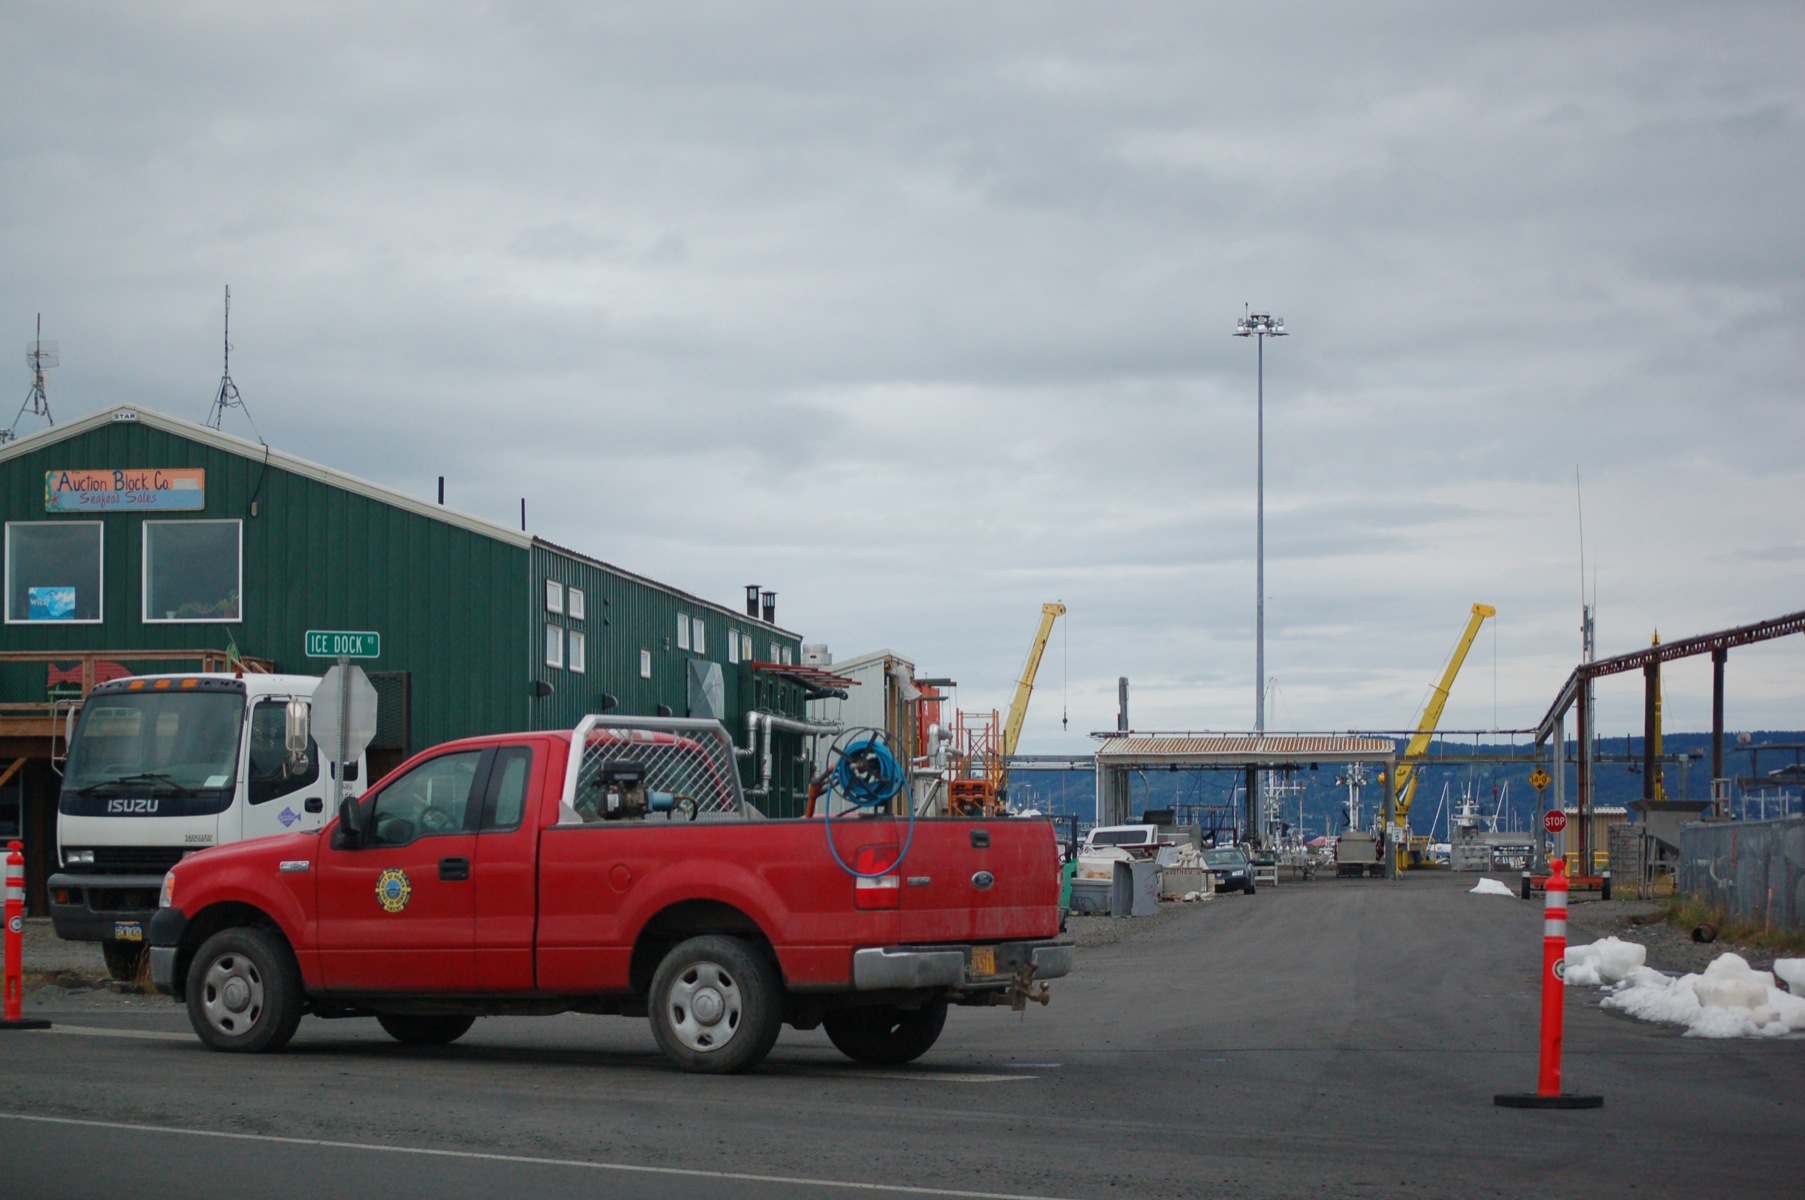 A Port of Homer truck blocks off Ice Dock Road on the Homer Spit during an evacuation and closure of the Fish Dock Road area on Monday afternoon. A possible carbon dioxide leak from a refrigeration unit at the Auction Block prompted harbor officials to close the area. The possible leak was caused by a refrigeration unit problem related to a power outage on the Spit and along the Sterling Highway.-Photo by Michael Armstrong, Homer News